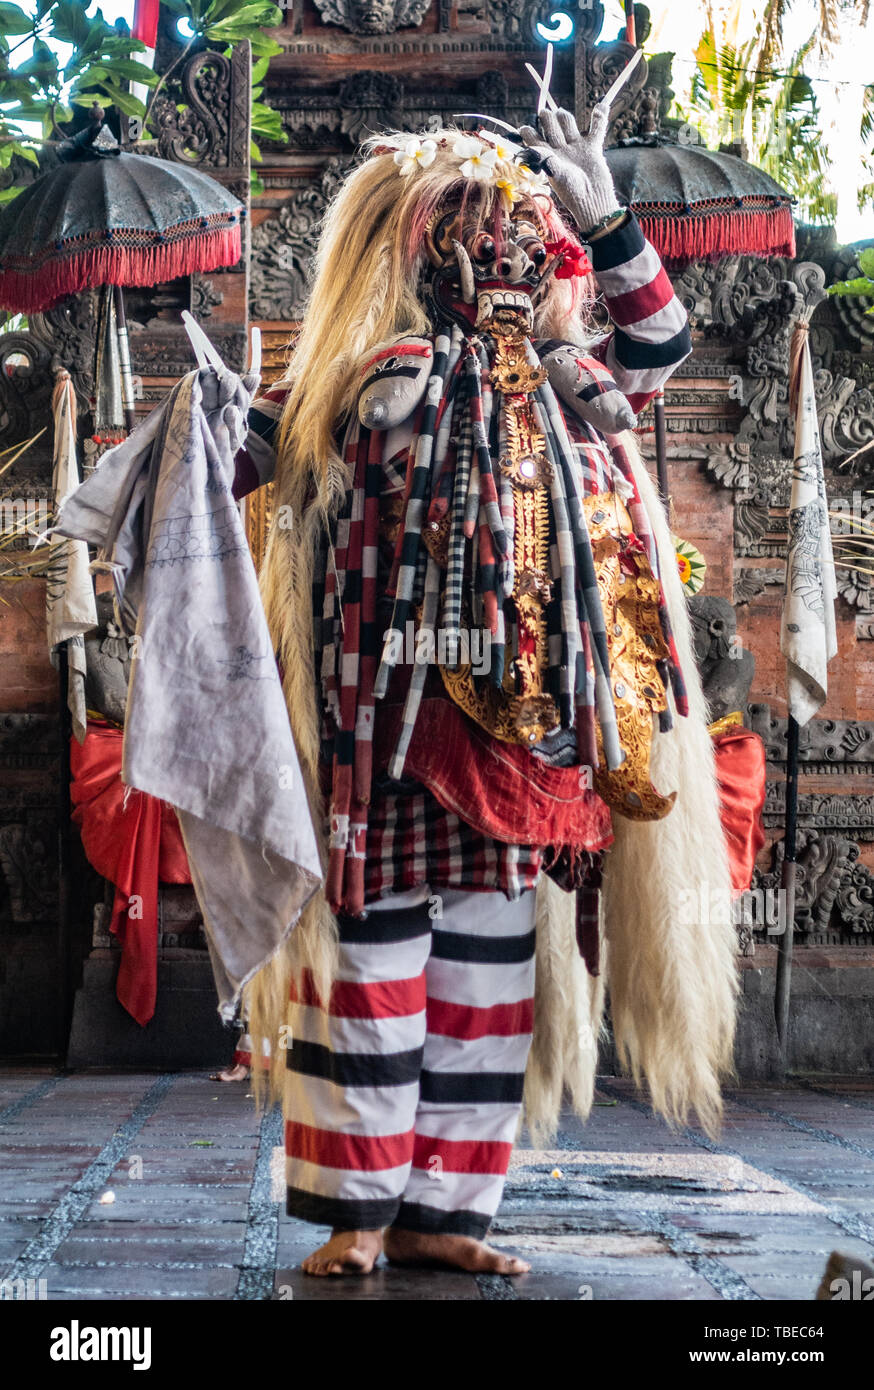 Banjar Gelulung, Bali, Indonesia - February 26, 2019: Mas Village. Play on stage setting. Closeup of monster with mask and long blond hair stading on  Stock Photo